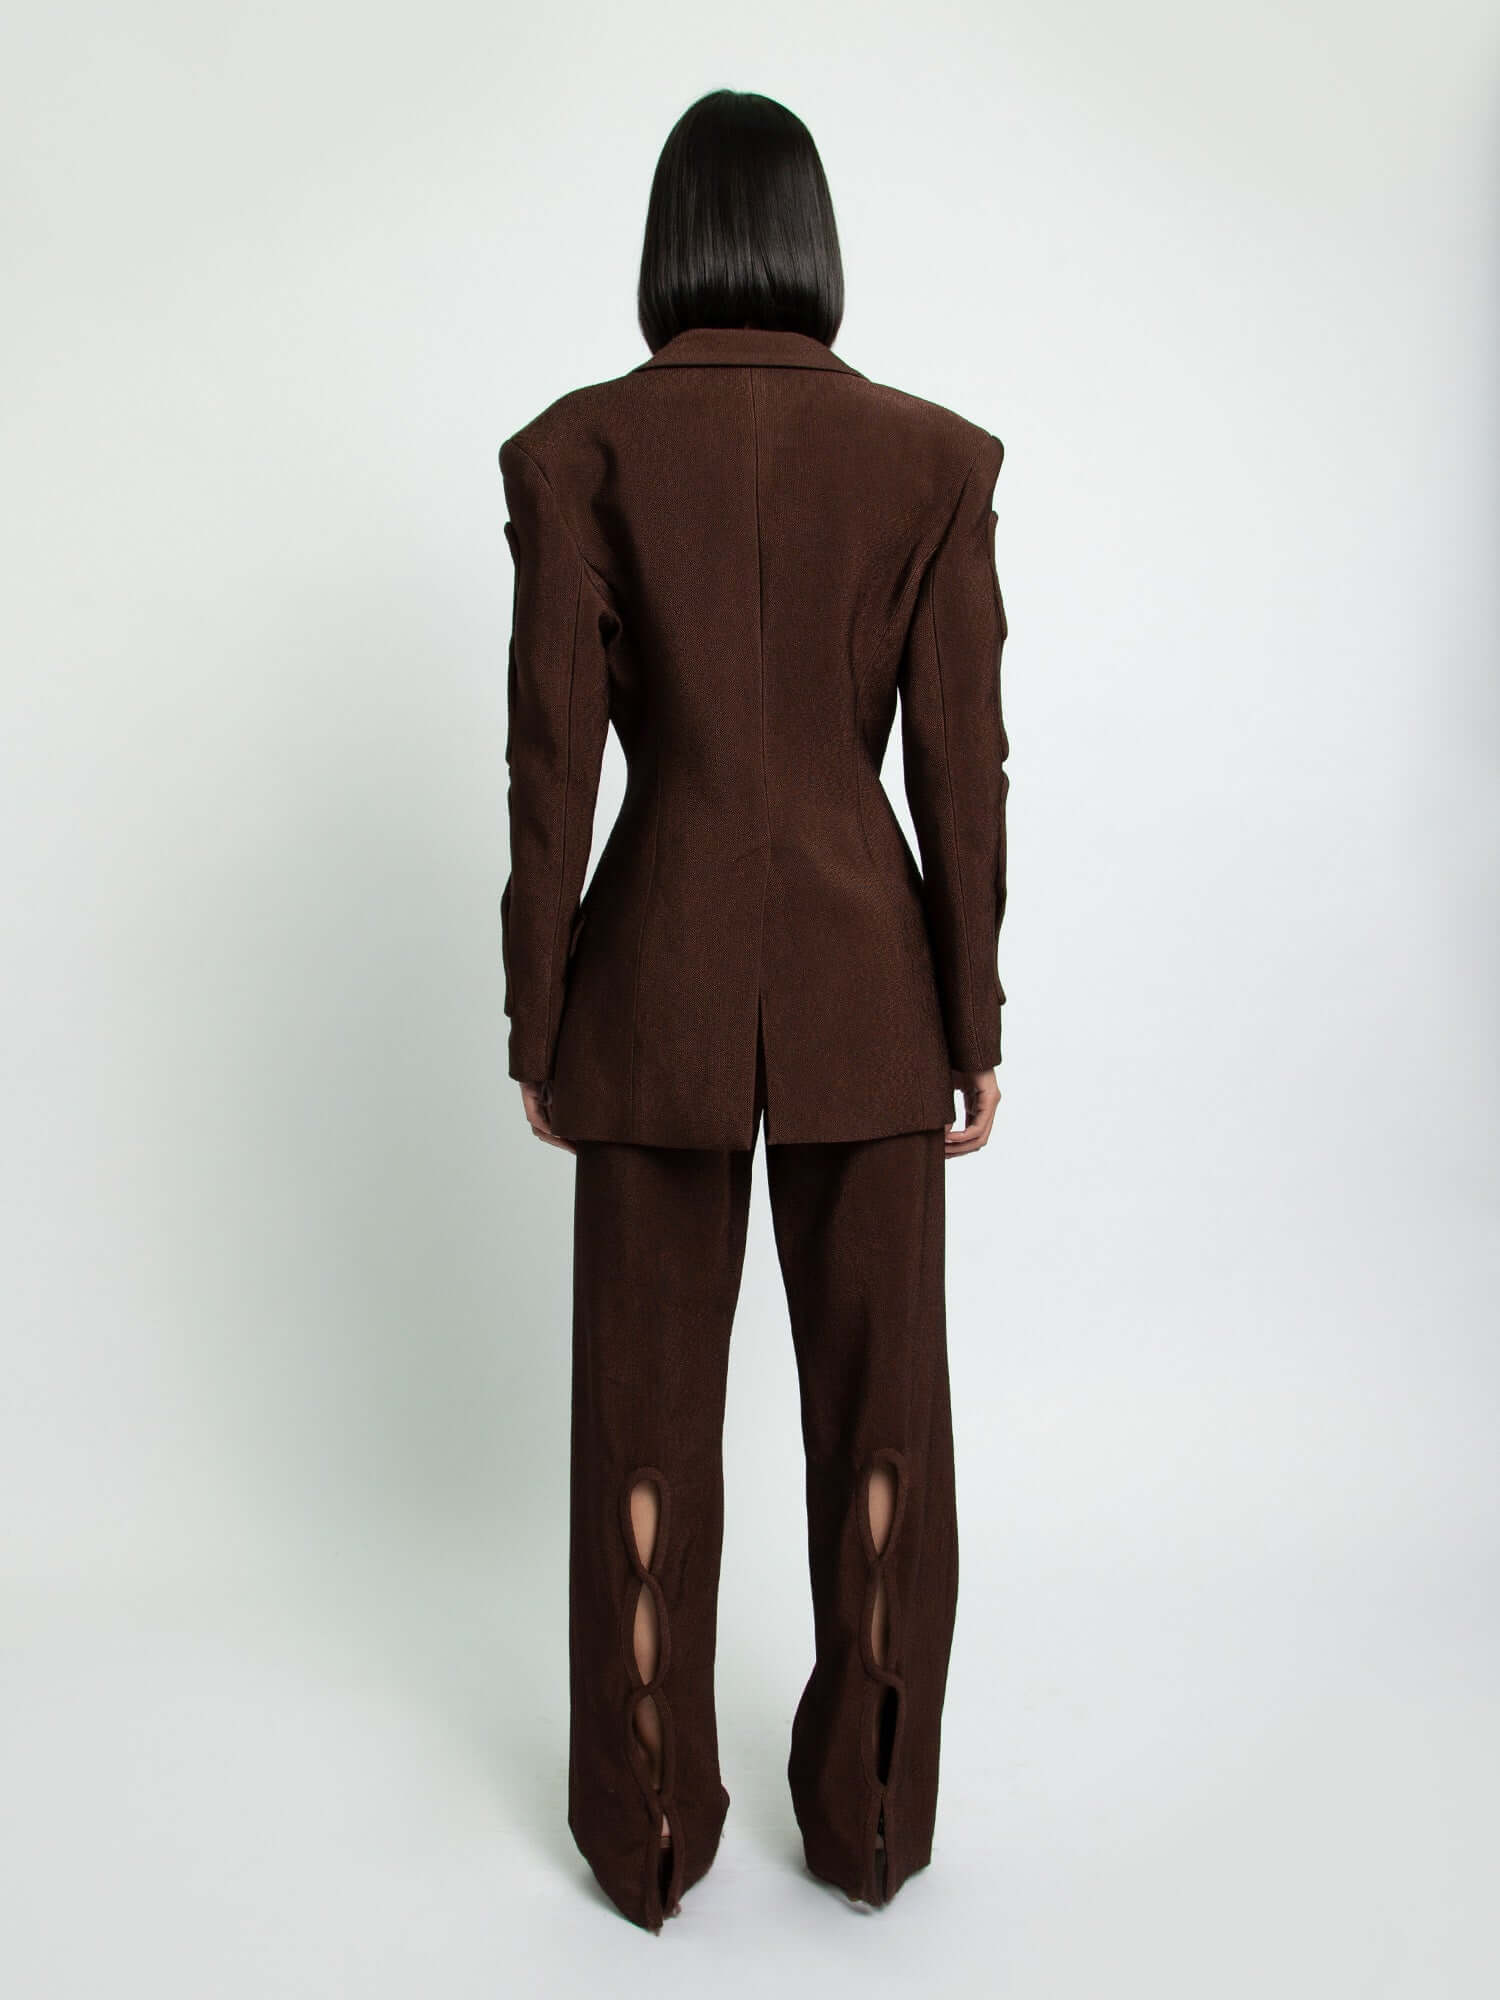 Christopher Esber Infinity Utility Trousers in Chocolate Brown from The New Trend